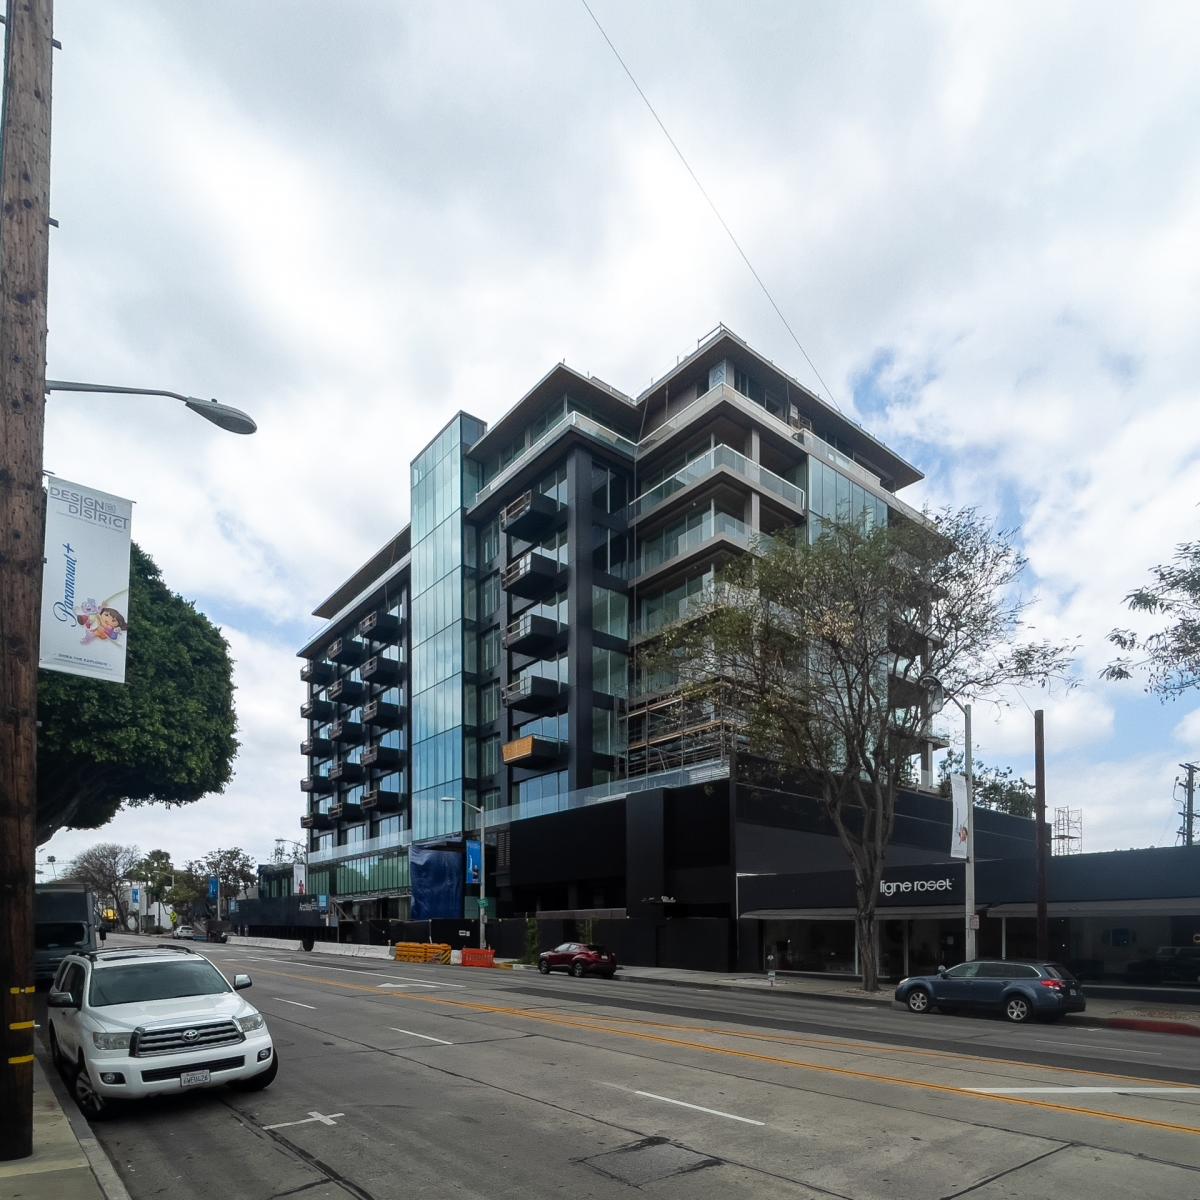 West Hollywood's 8899 Beverly residences are in the home stretch